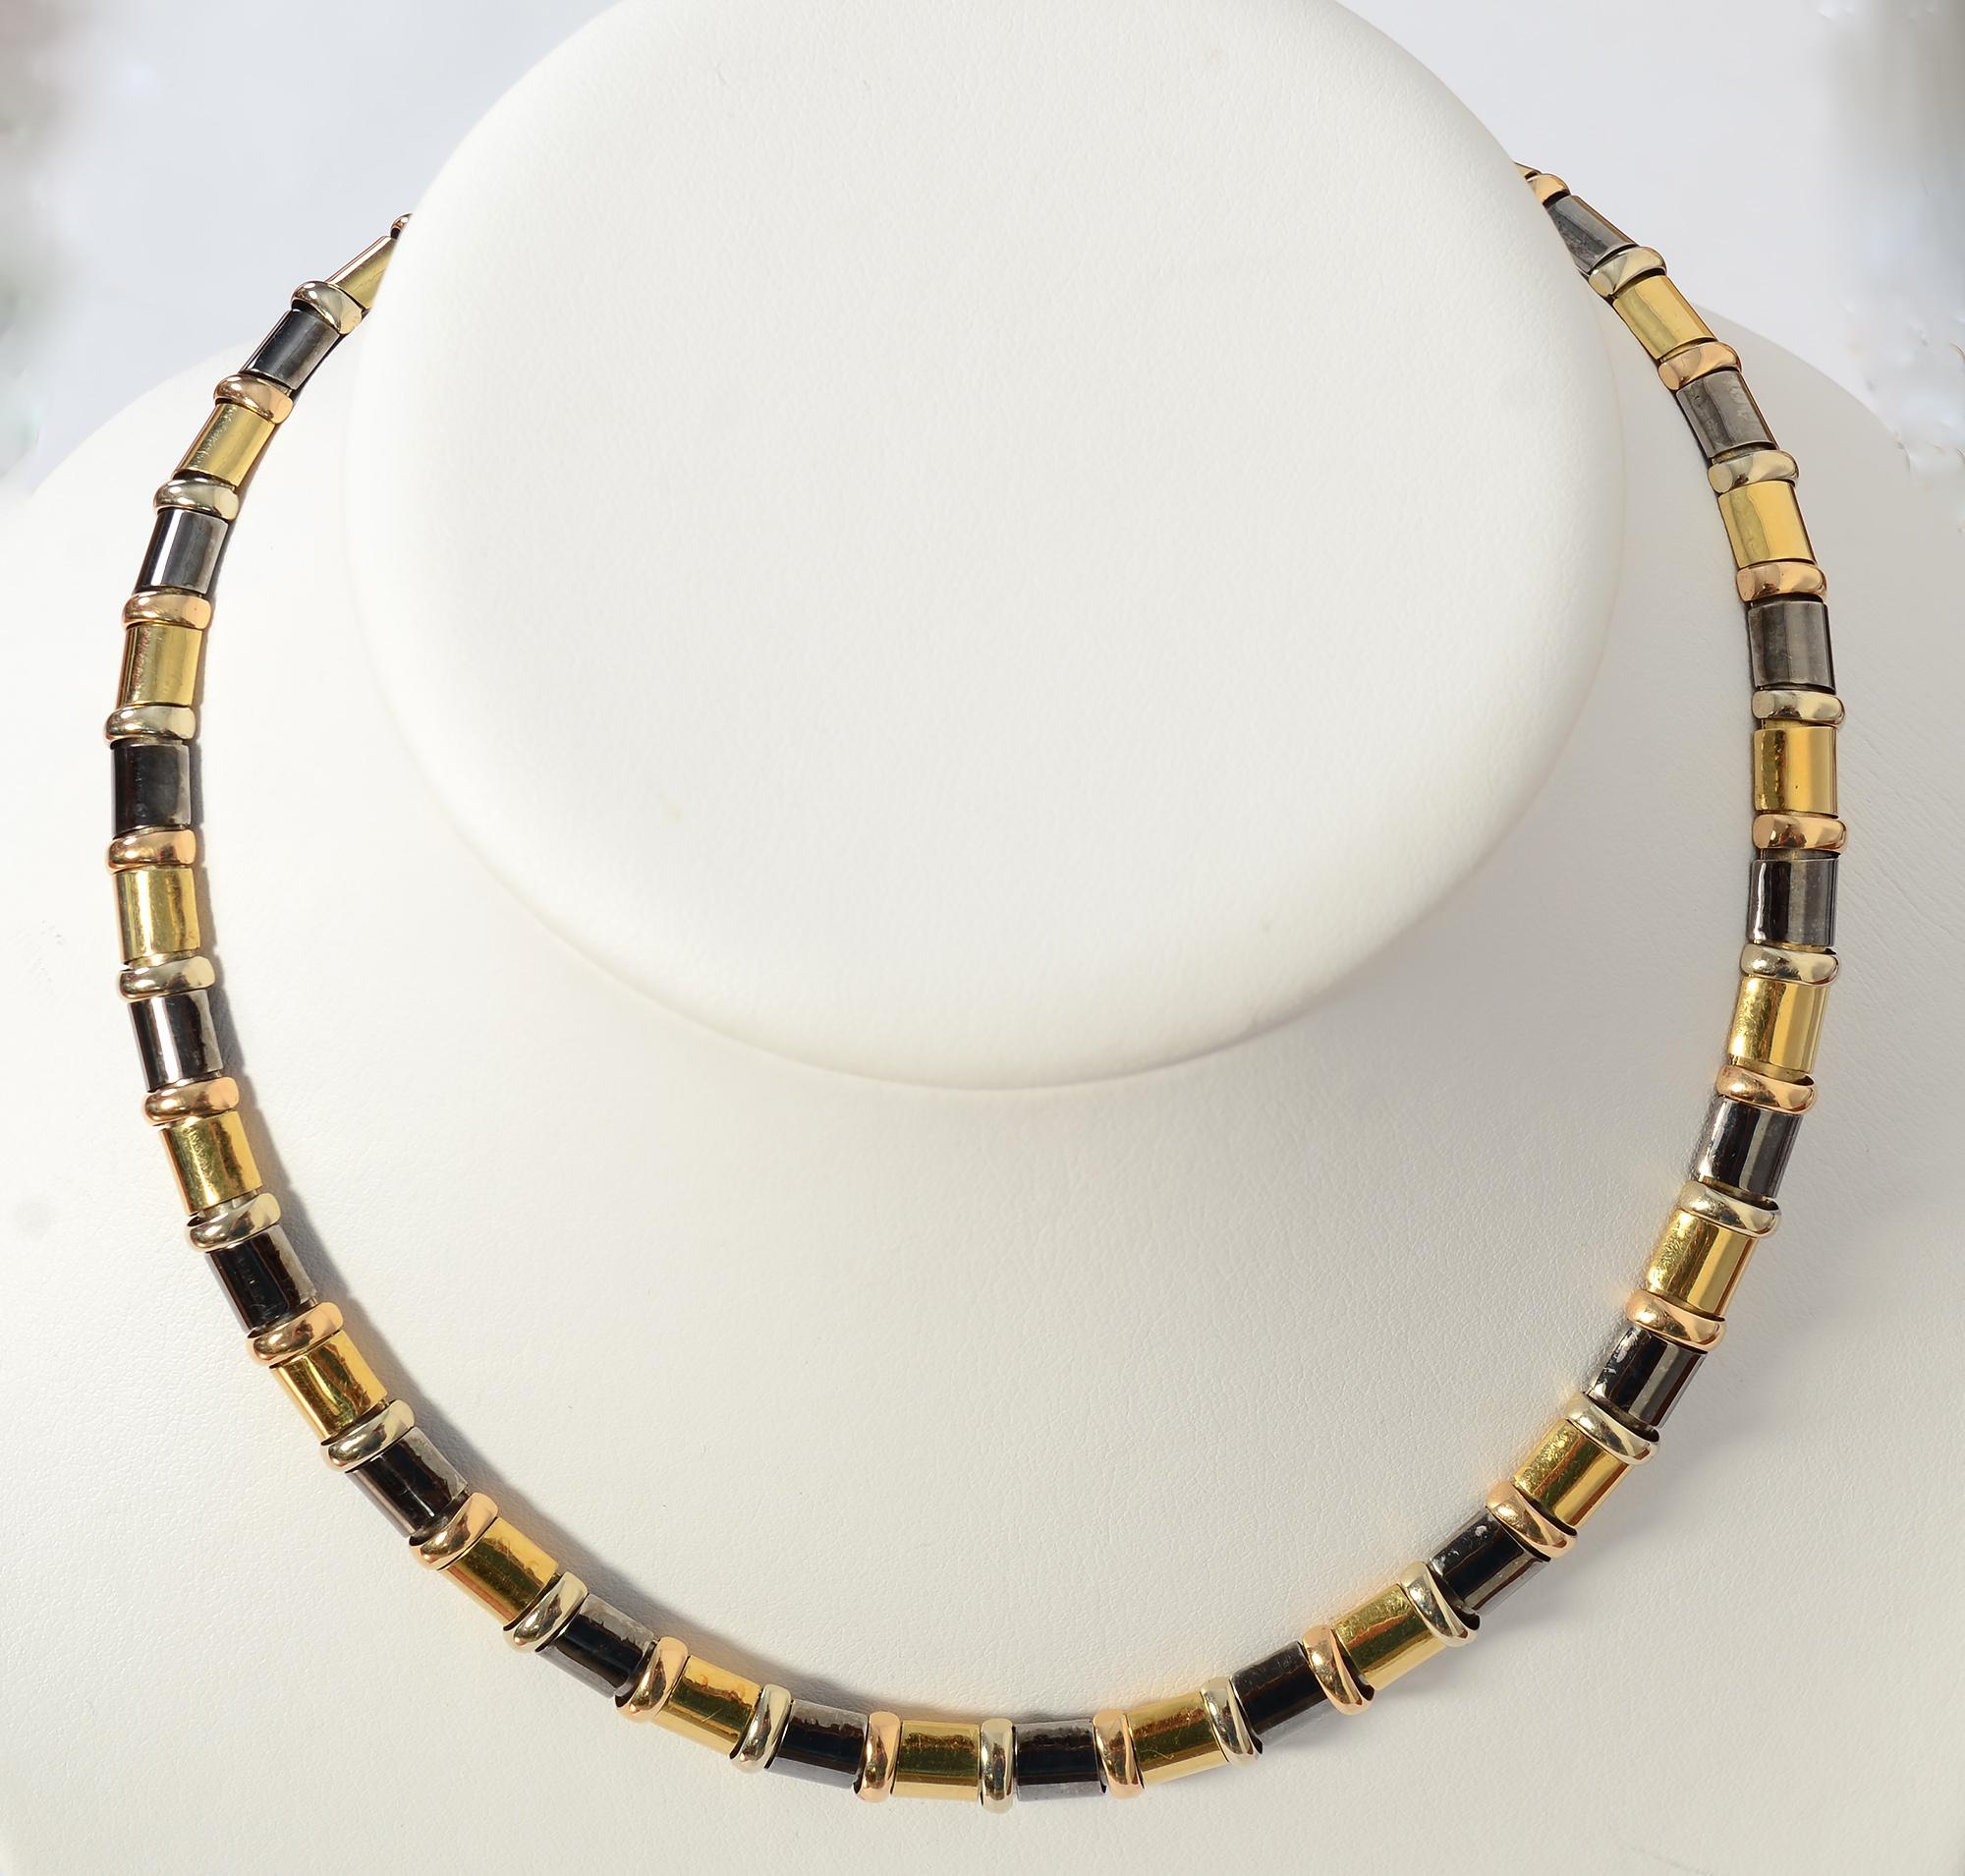 Sporty and chic two tone choker necklace by Chimento. The necklace is made of two colors of 18 karat gold alternating with oxidized sterling silver. The necklace is 16 inches long and 5/16